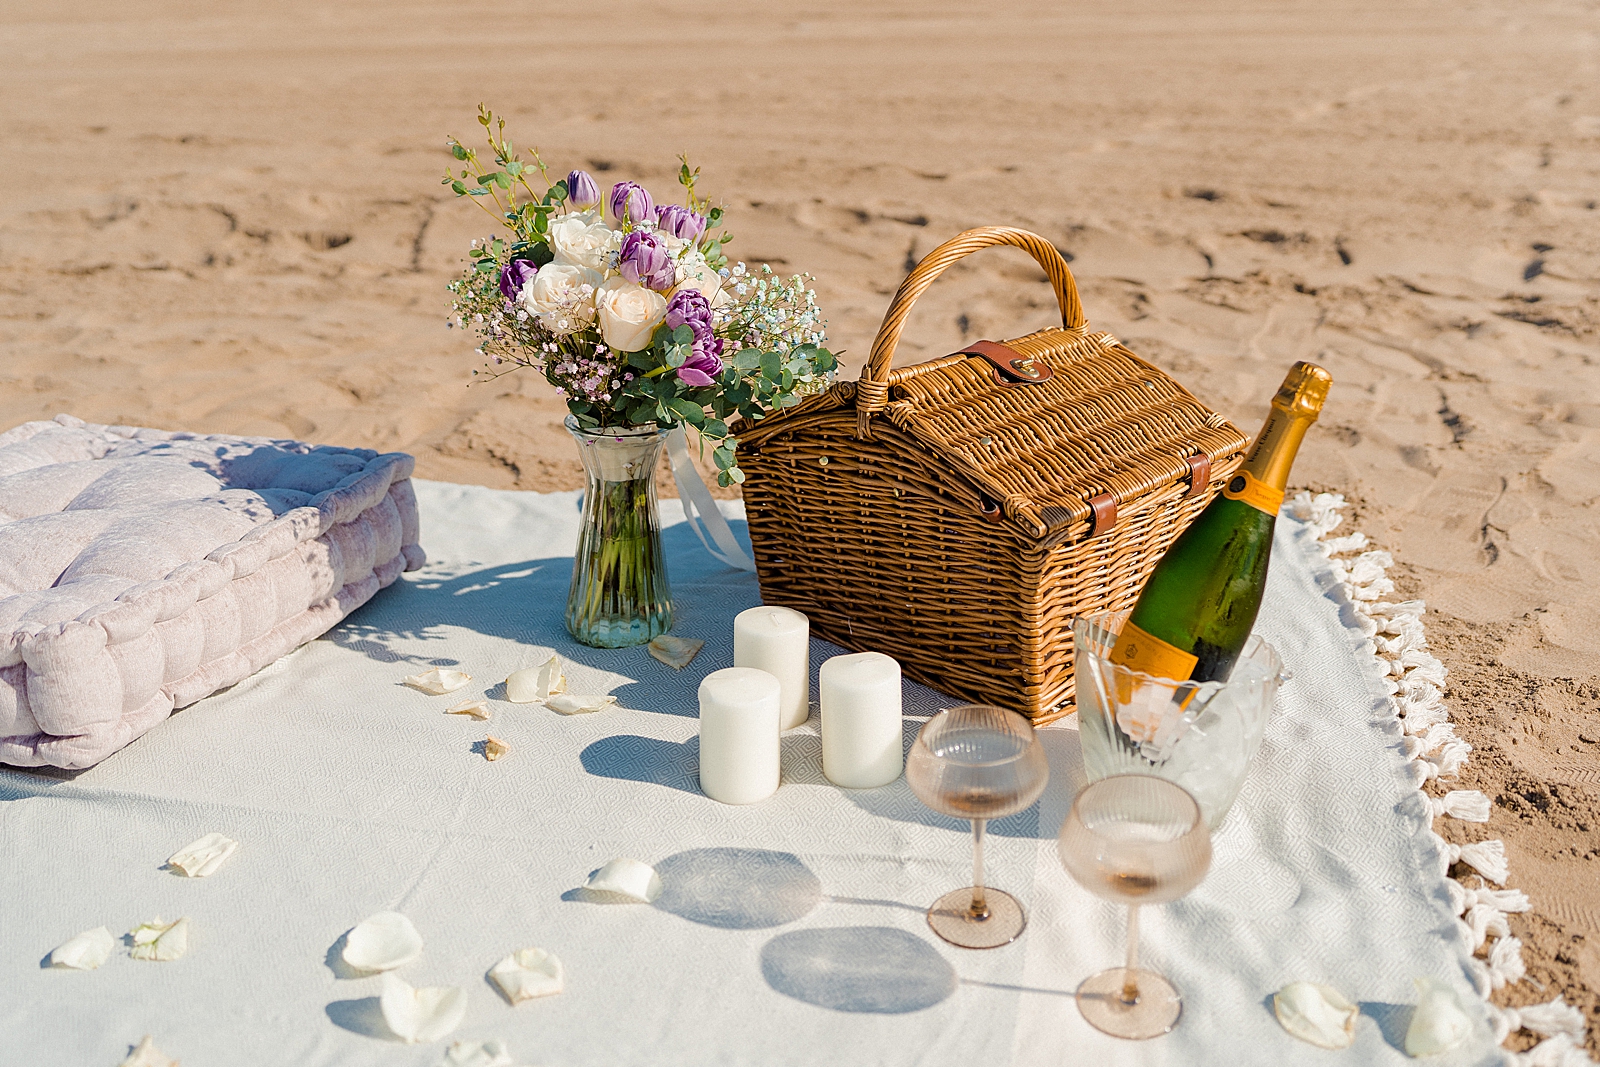 beach picnic proposal set up with picnic basket, veuve clicquot champagne. glasses, and candles